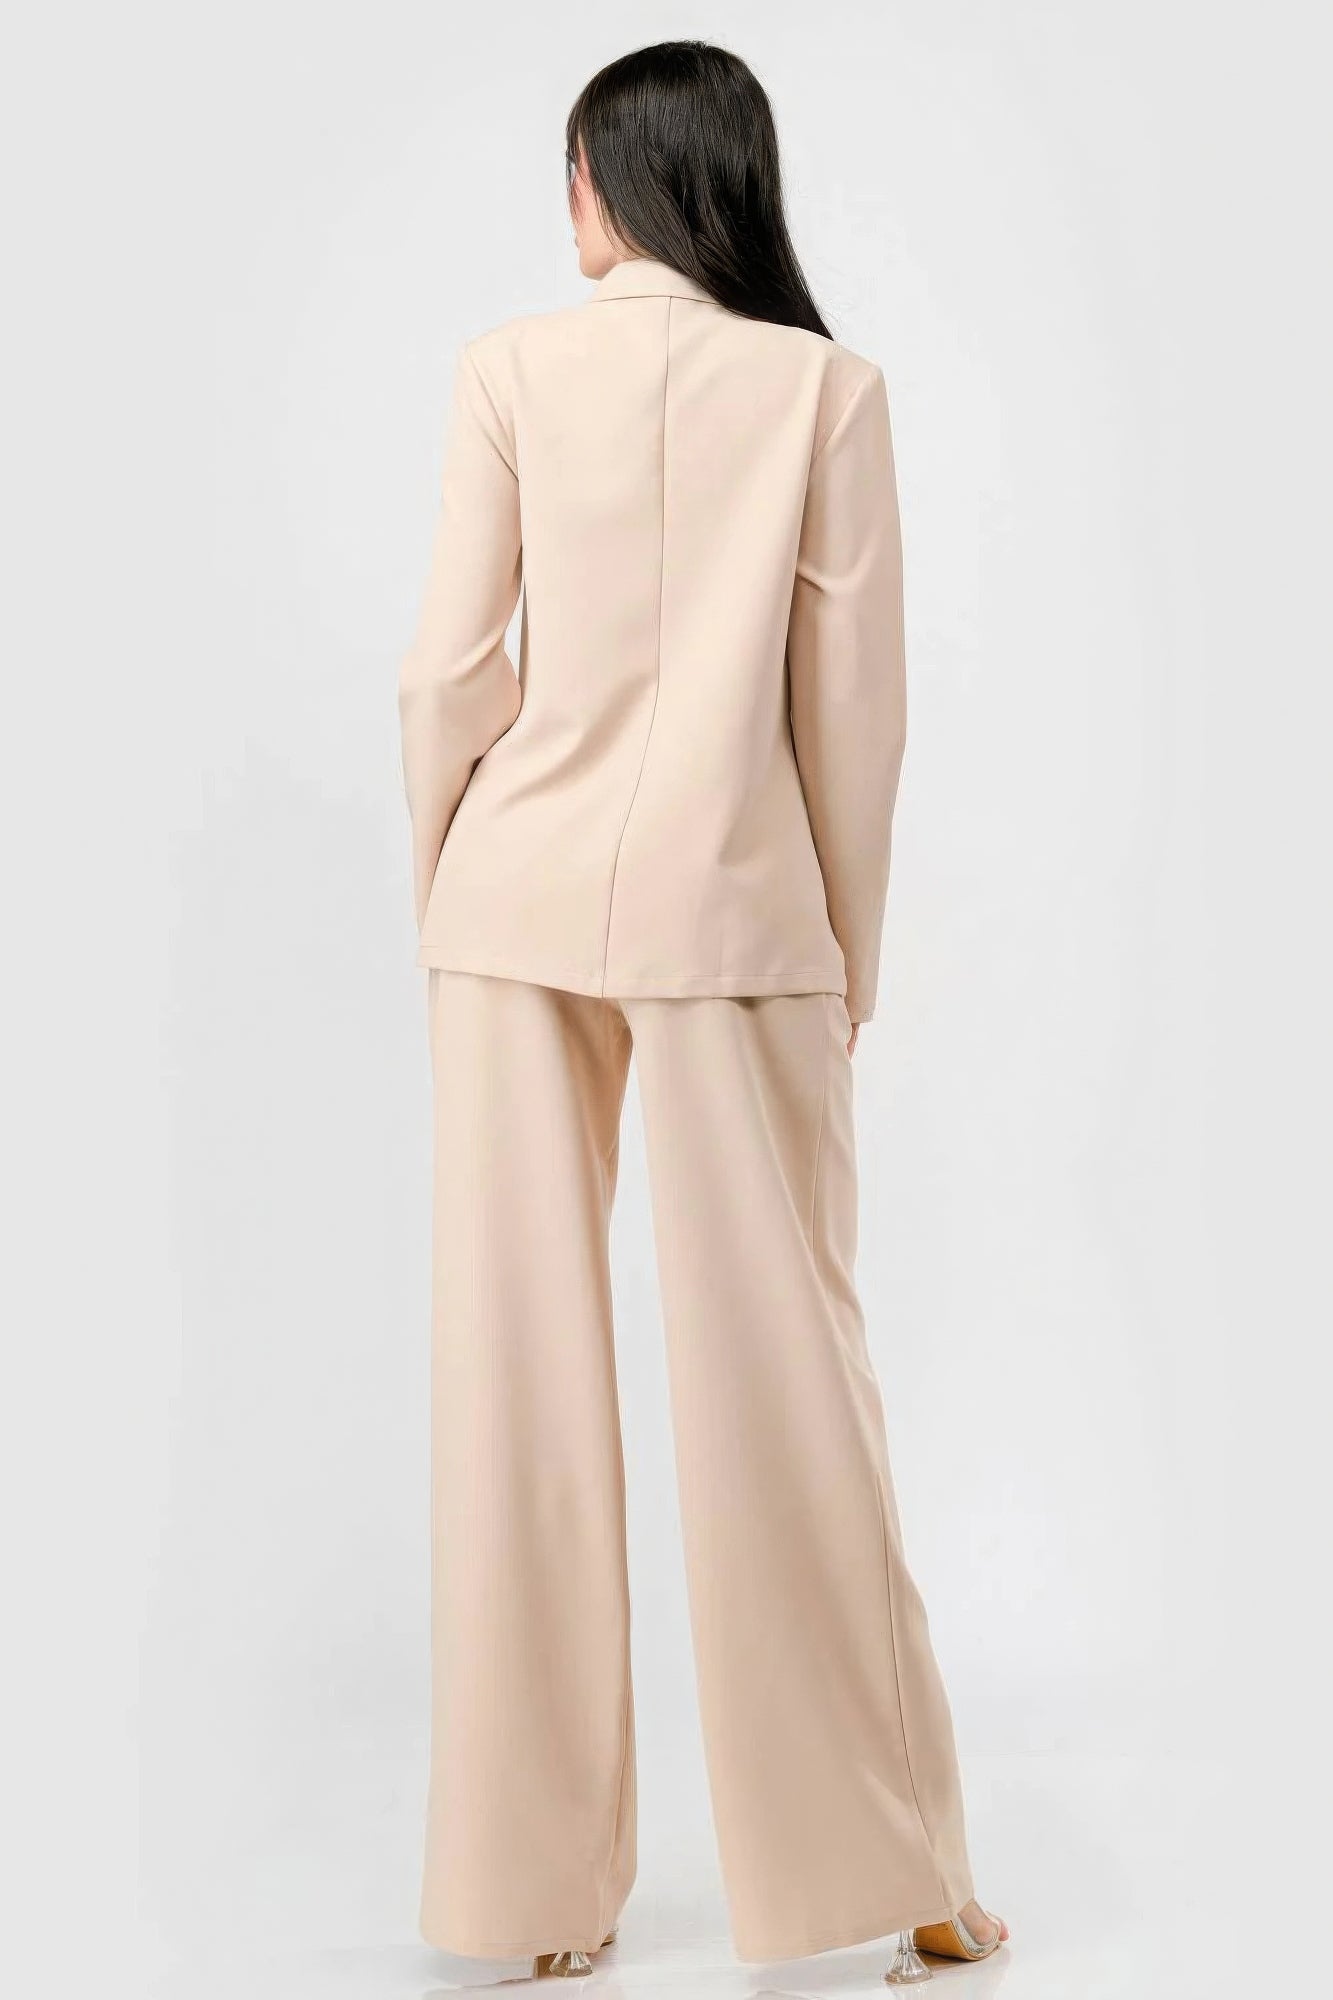 Luxe Stretch Woven Loose Fit Blazer And Wide Legs Pants Semi Formal Set - Tigbuls Variety Fashion